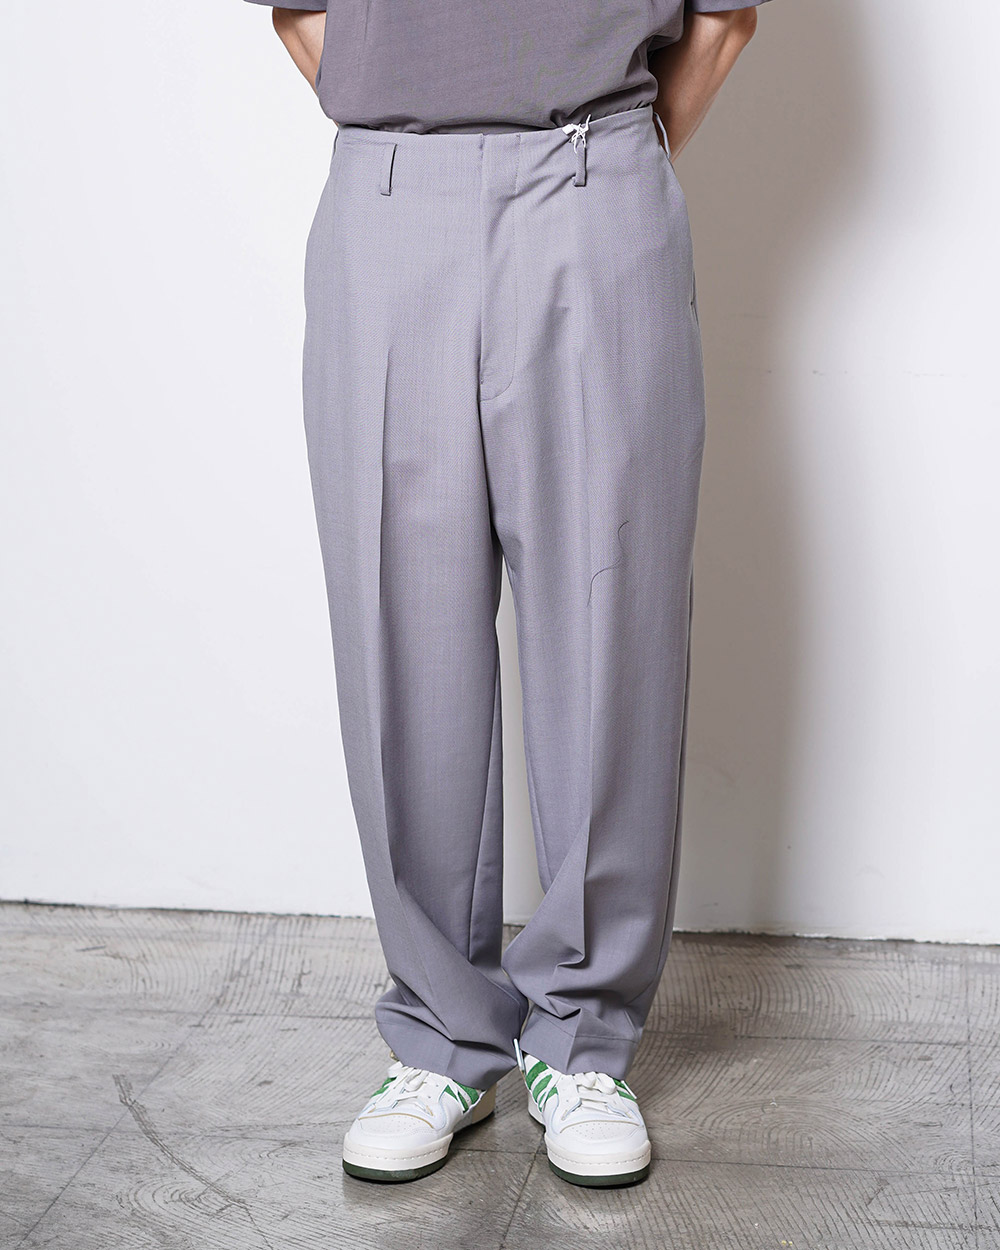 Stitchless Trousers (Gray)